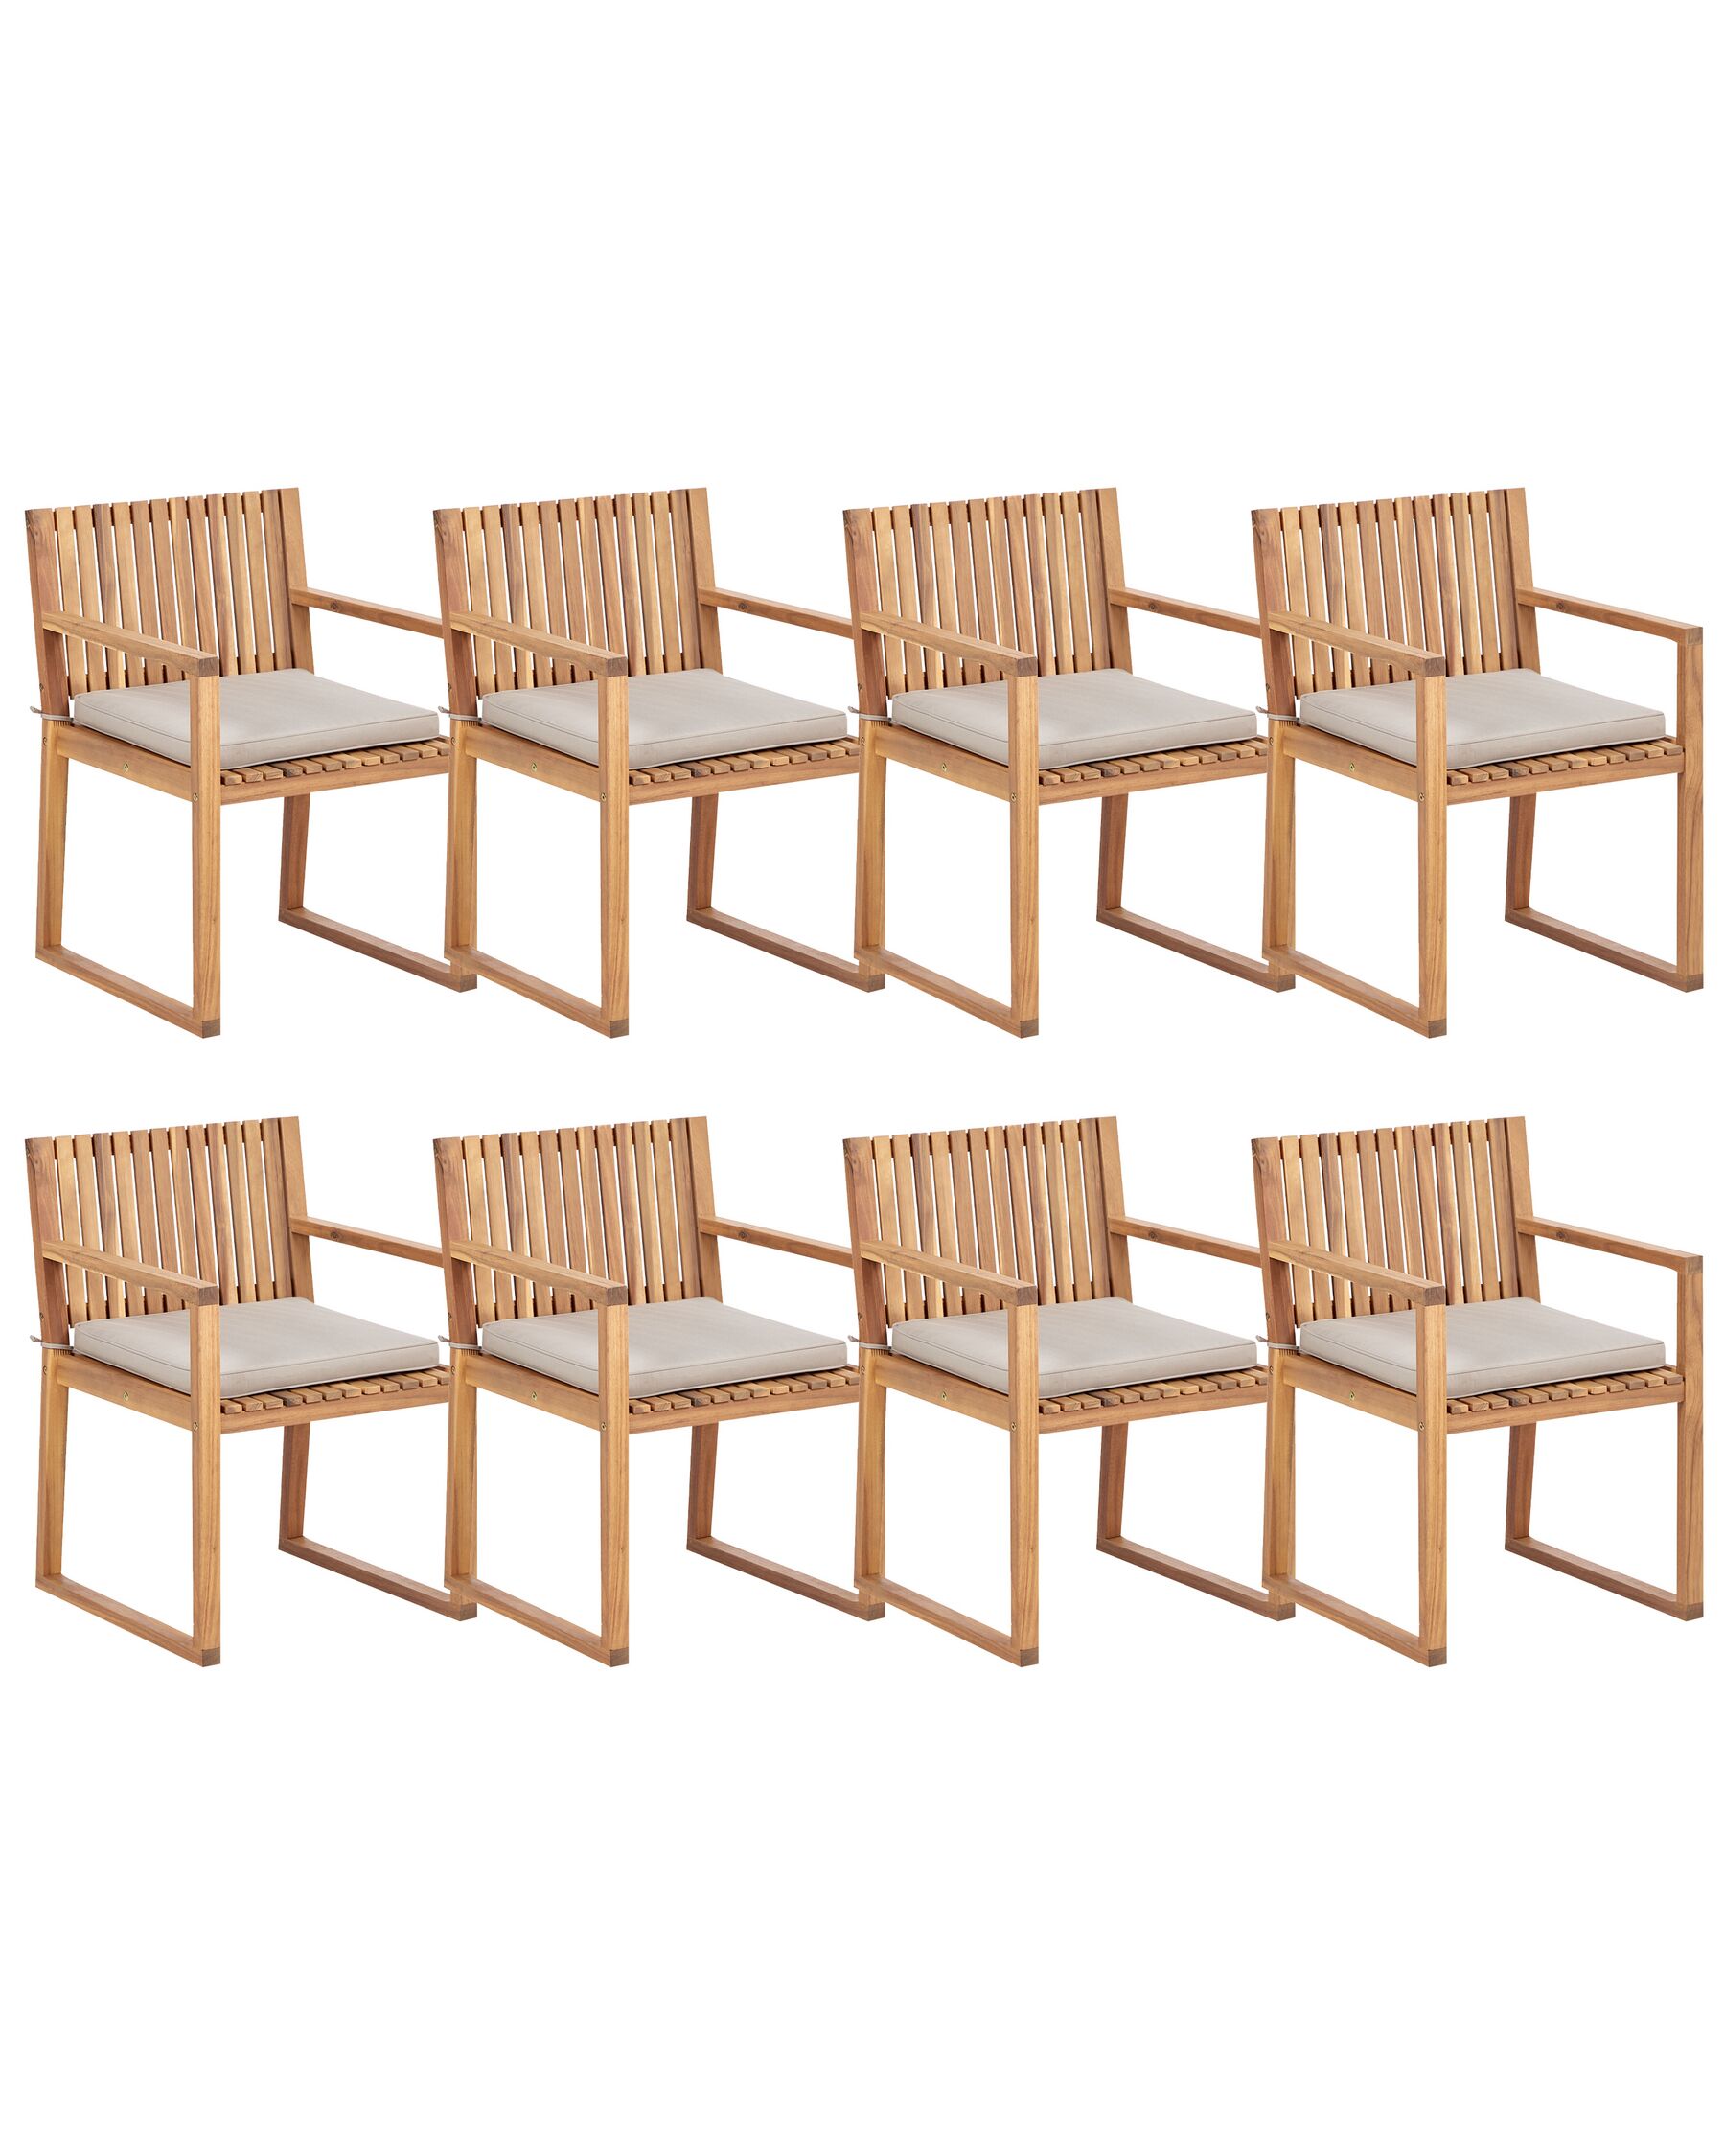 Set of 8 Certified Acacia Wood Garden Dining Chairs with Taupe Cushions SASSARI II_923852